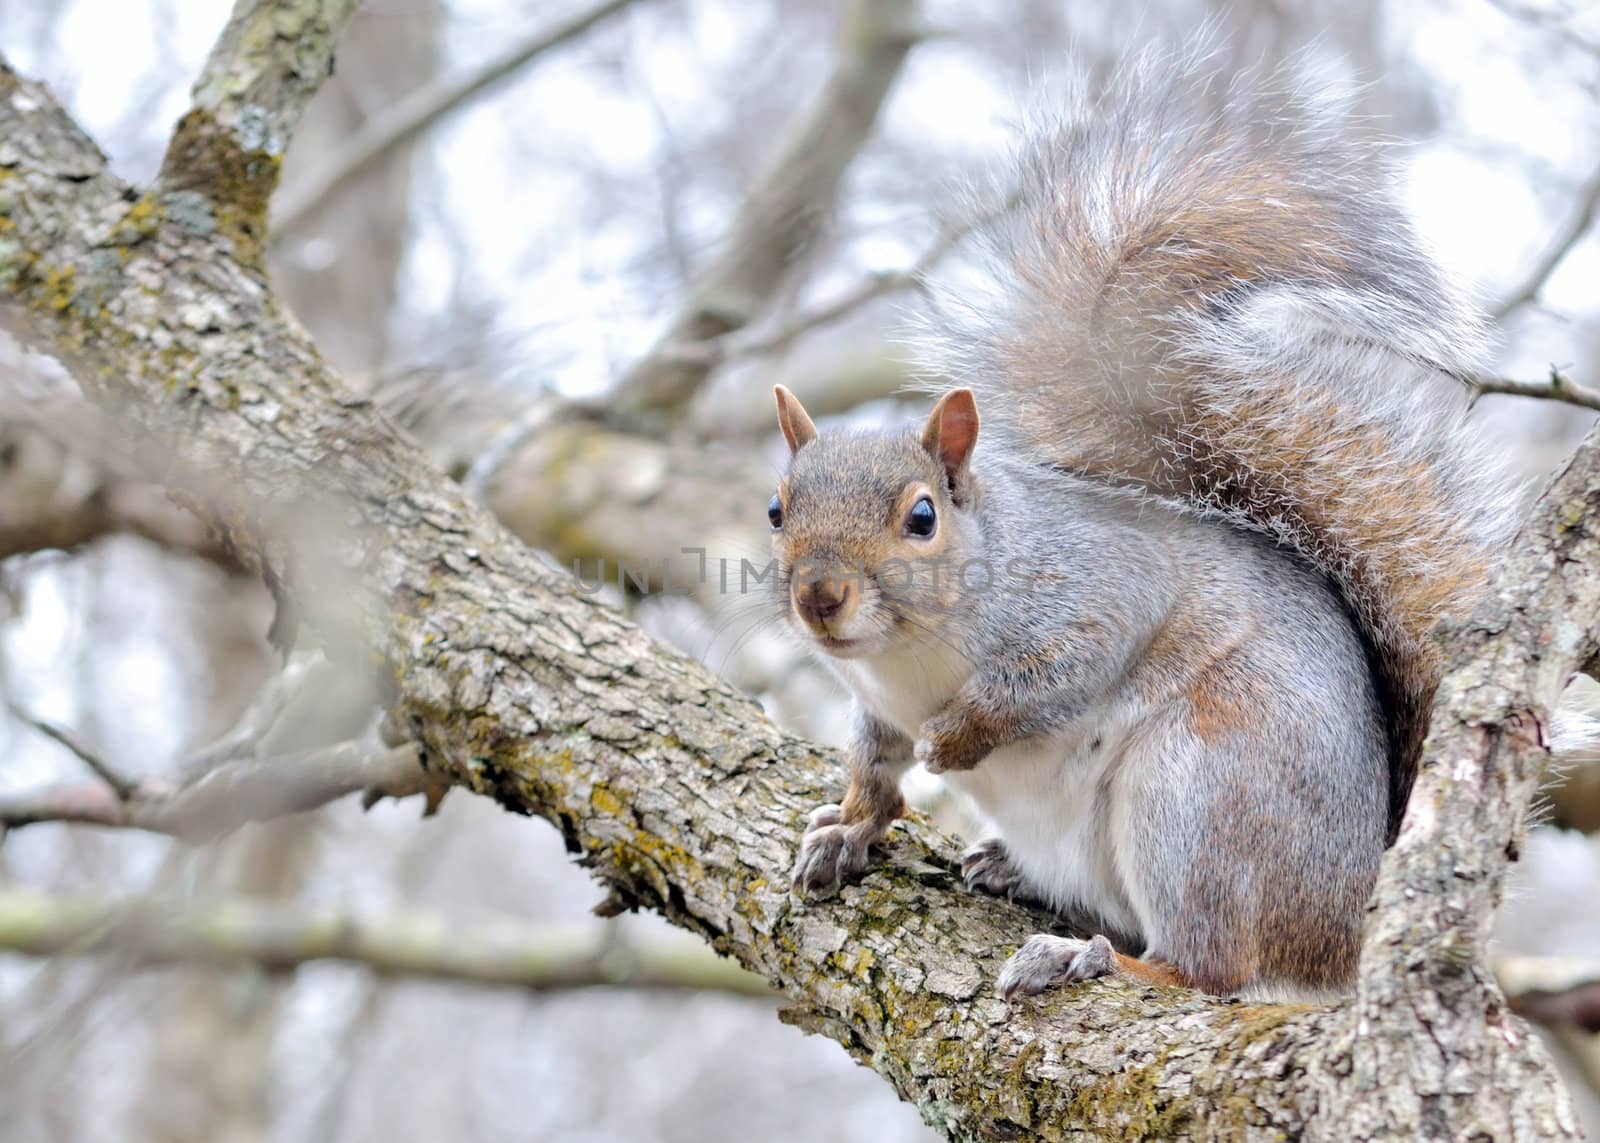 A gray squirrel perched in a tree.